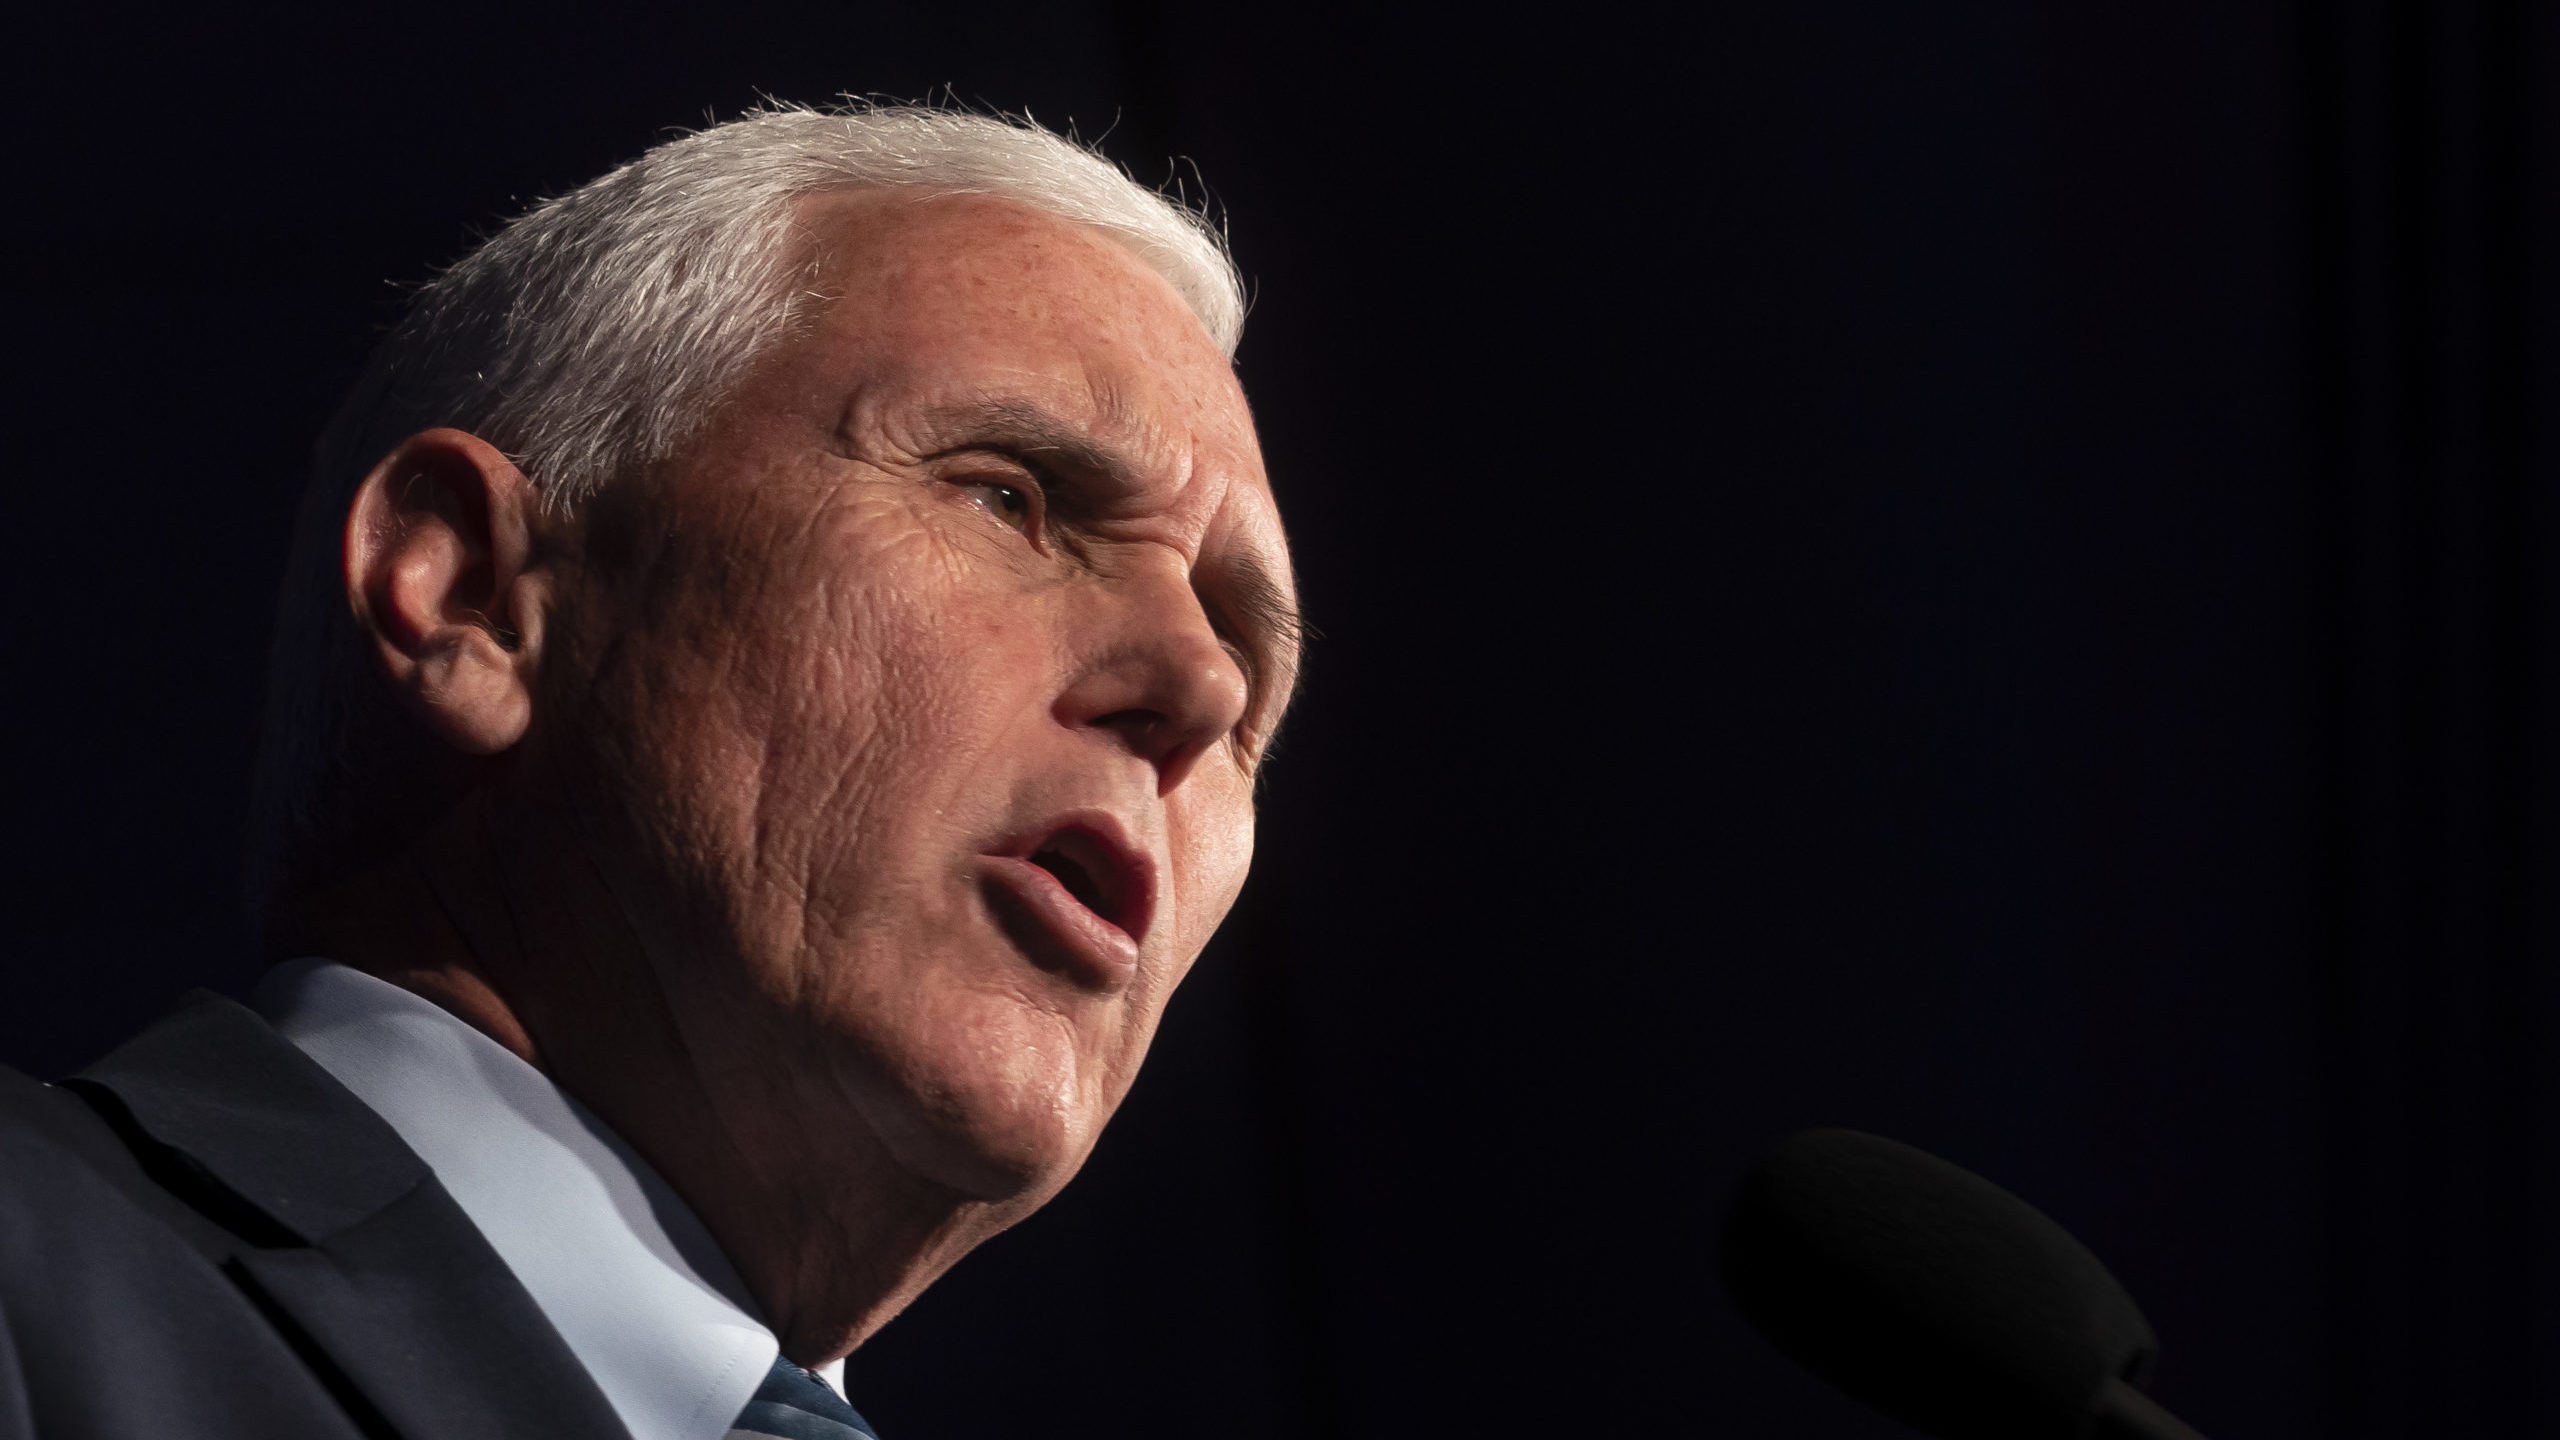 A lawyer for former Vice President Mike Pence discovered documents marked as classified at Pence's ...